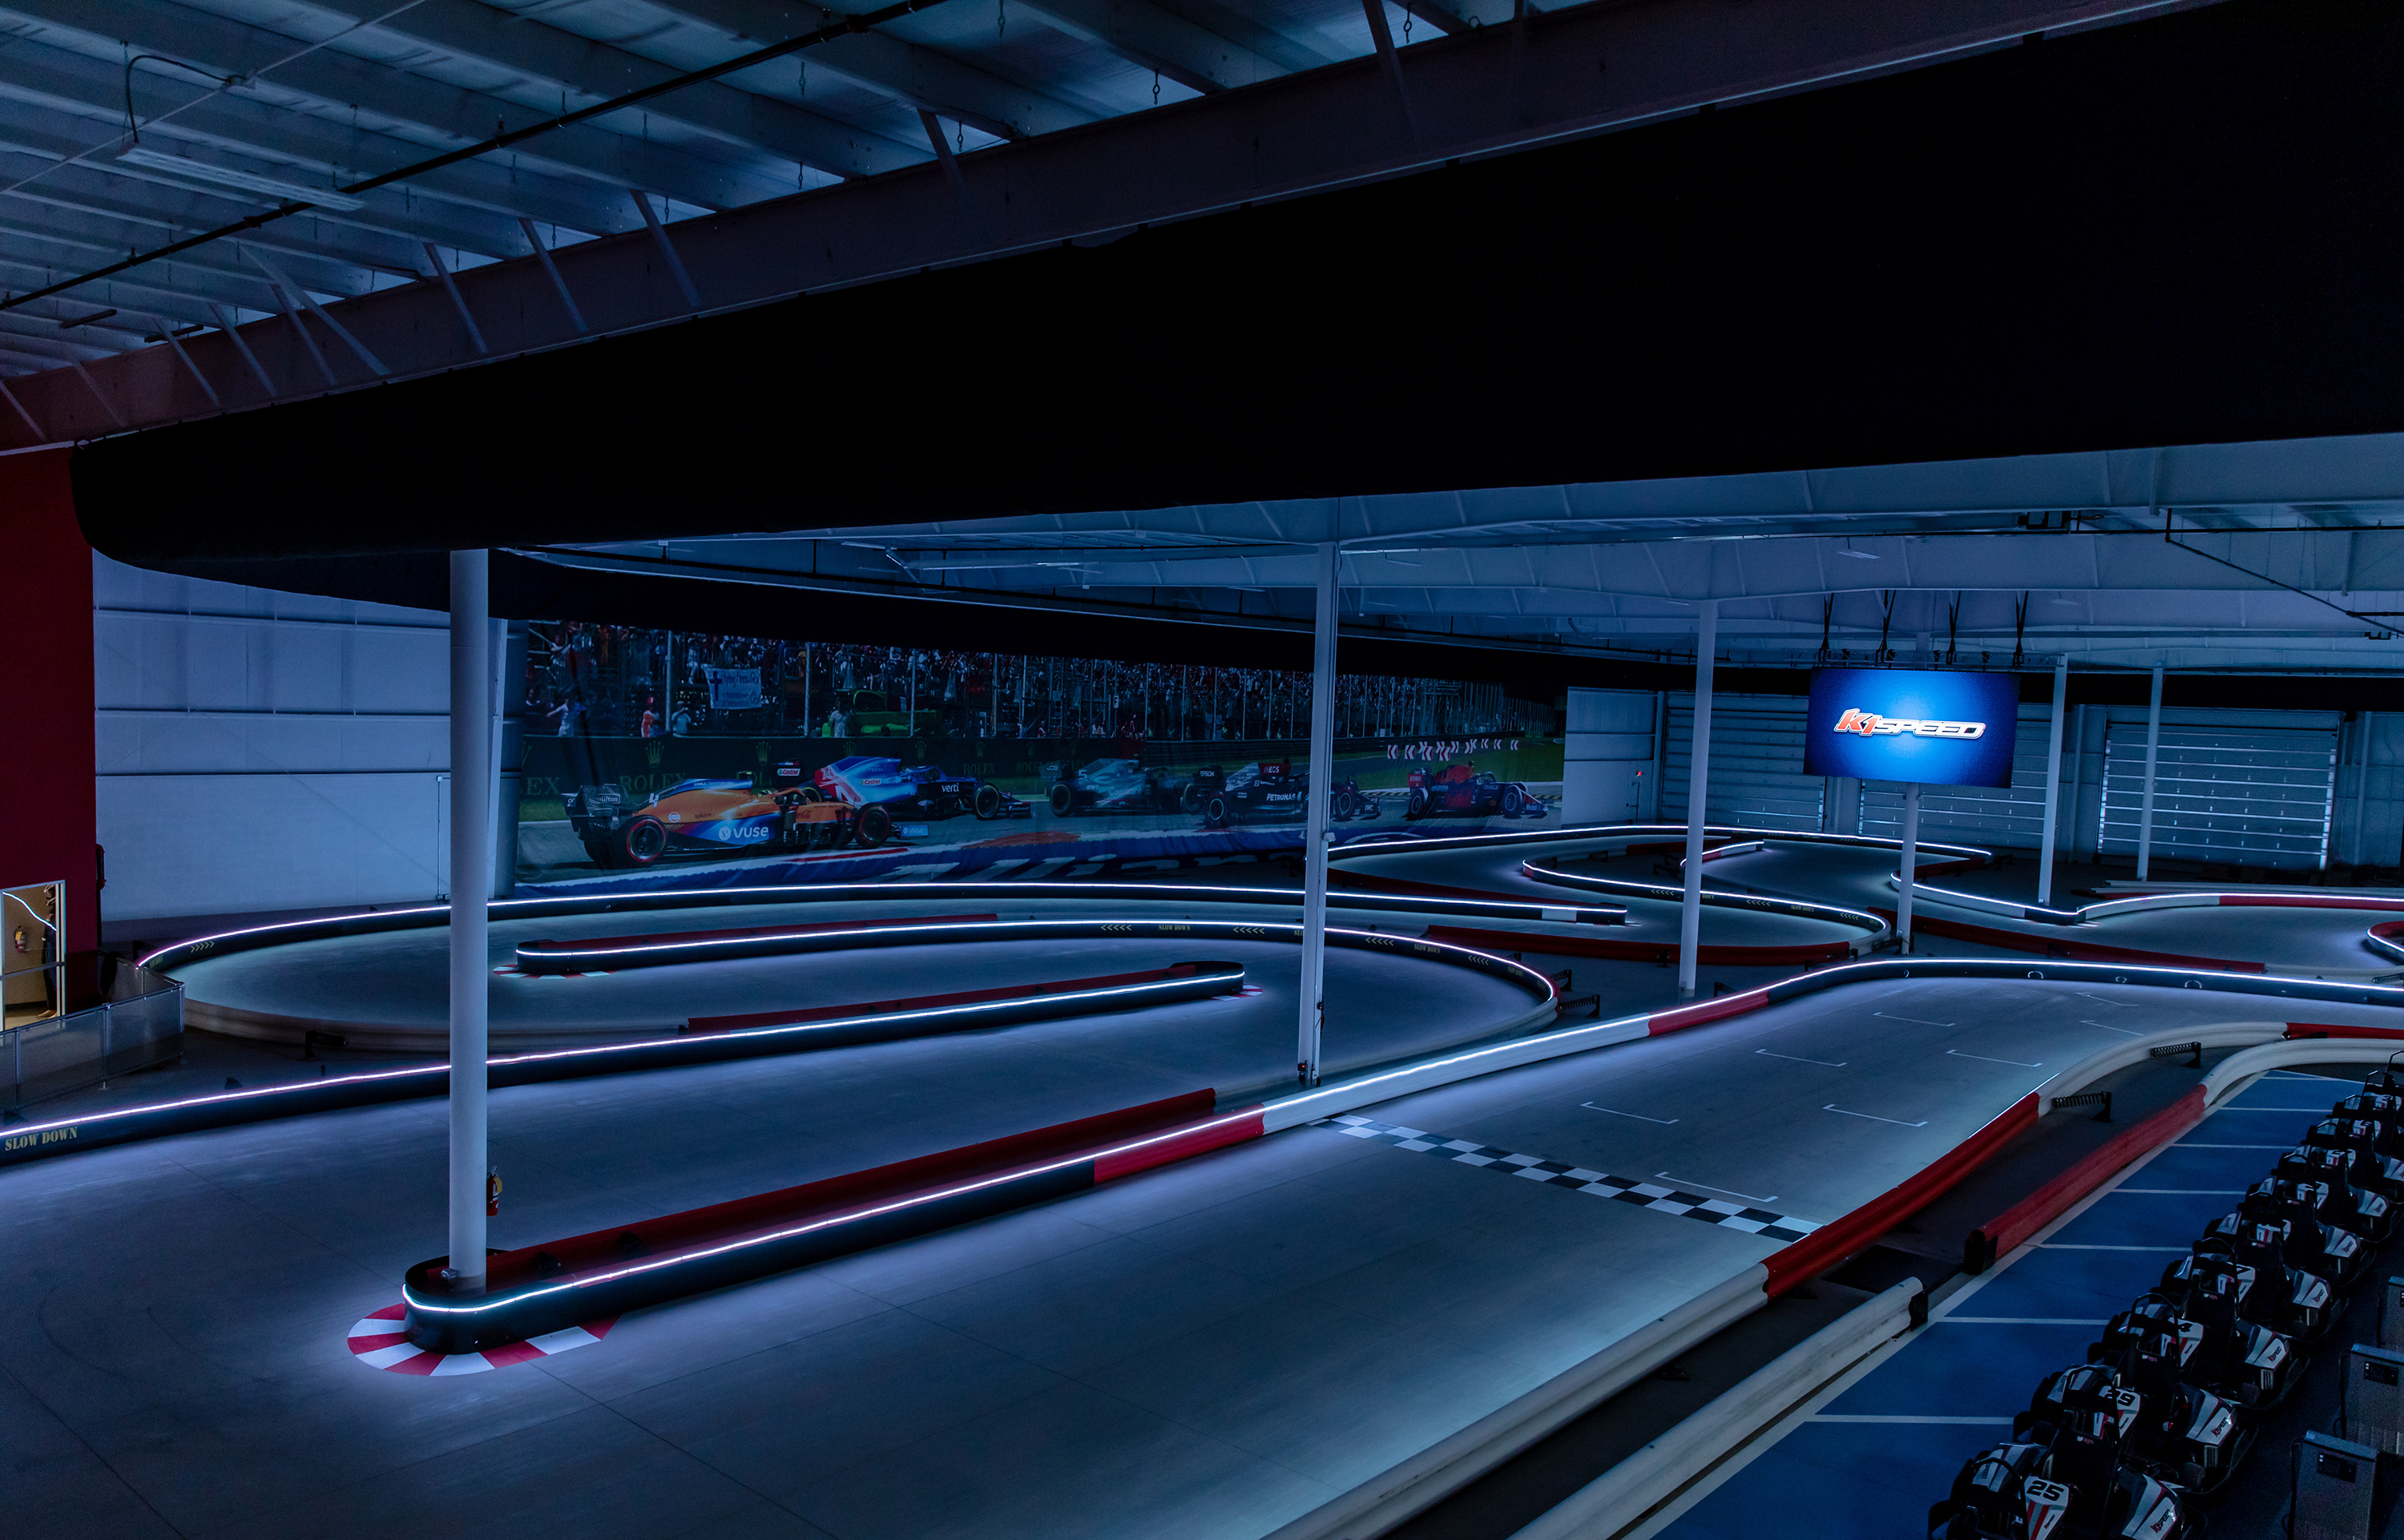 The indoor track at K1 Speed Canton is lined with LEDs for night racing